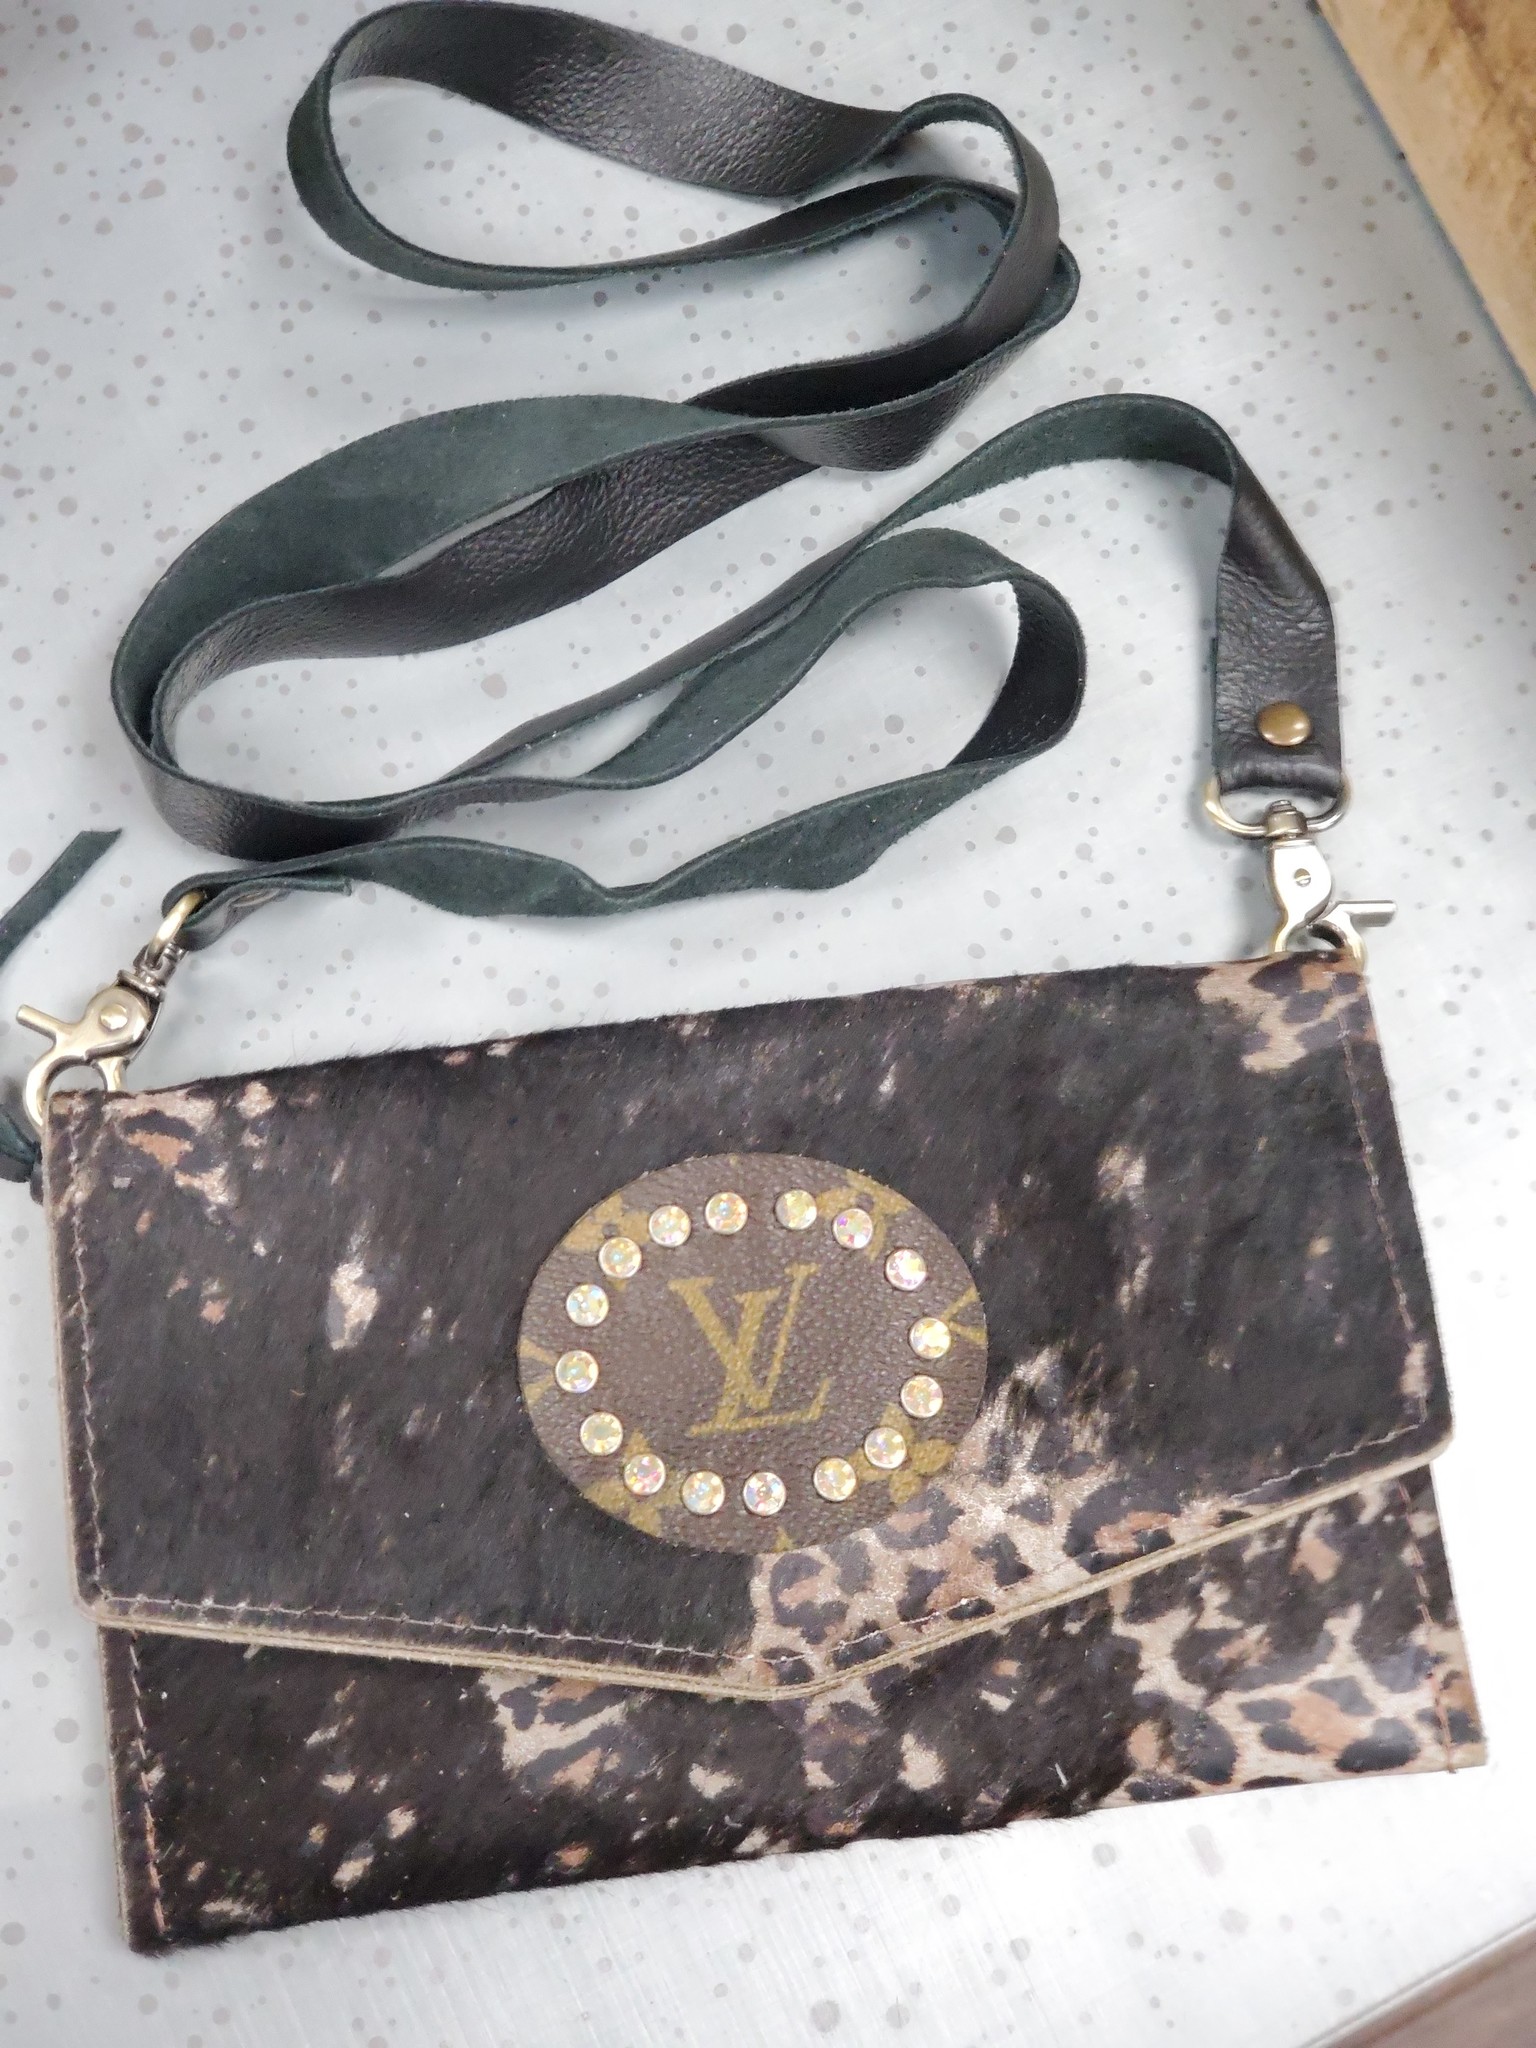 Keep It Gypsy Upcycled LV Leather &Leopard Hide Crossbody Wallet